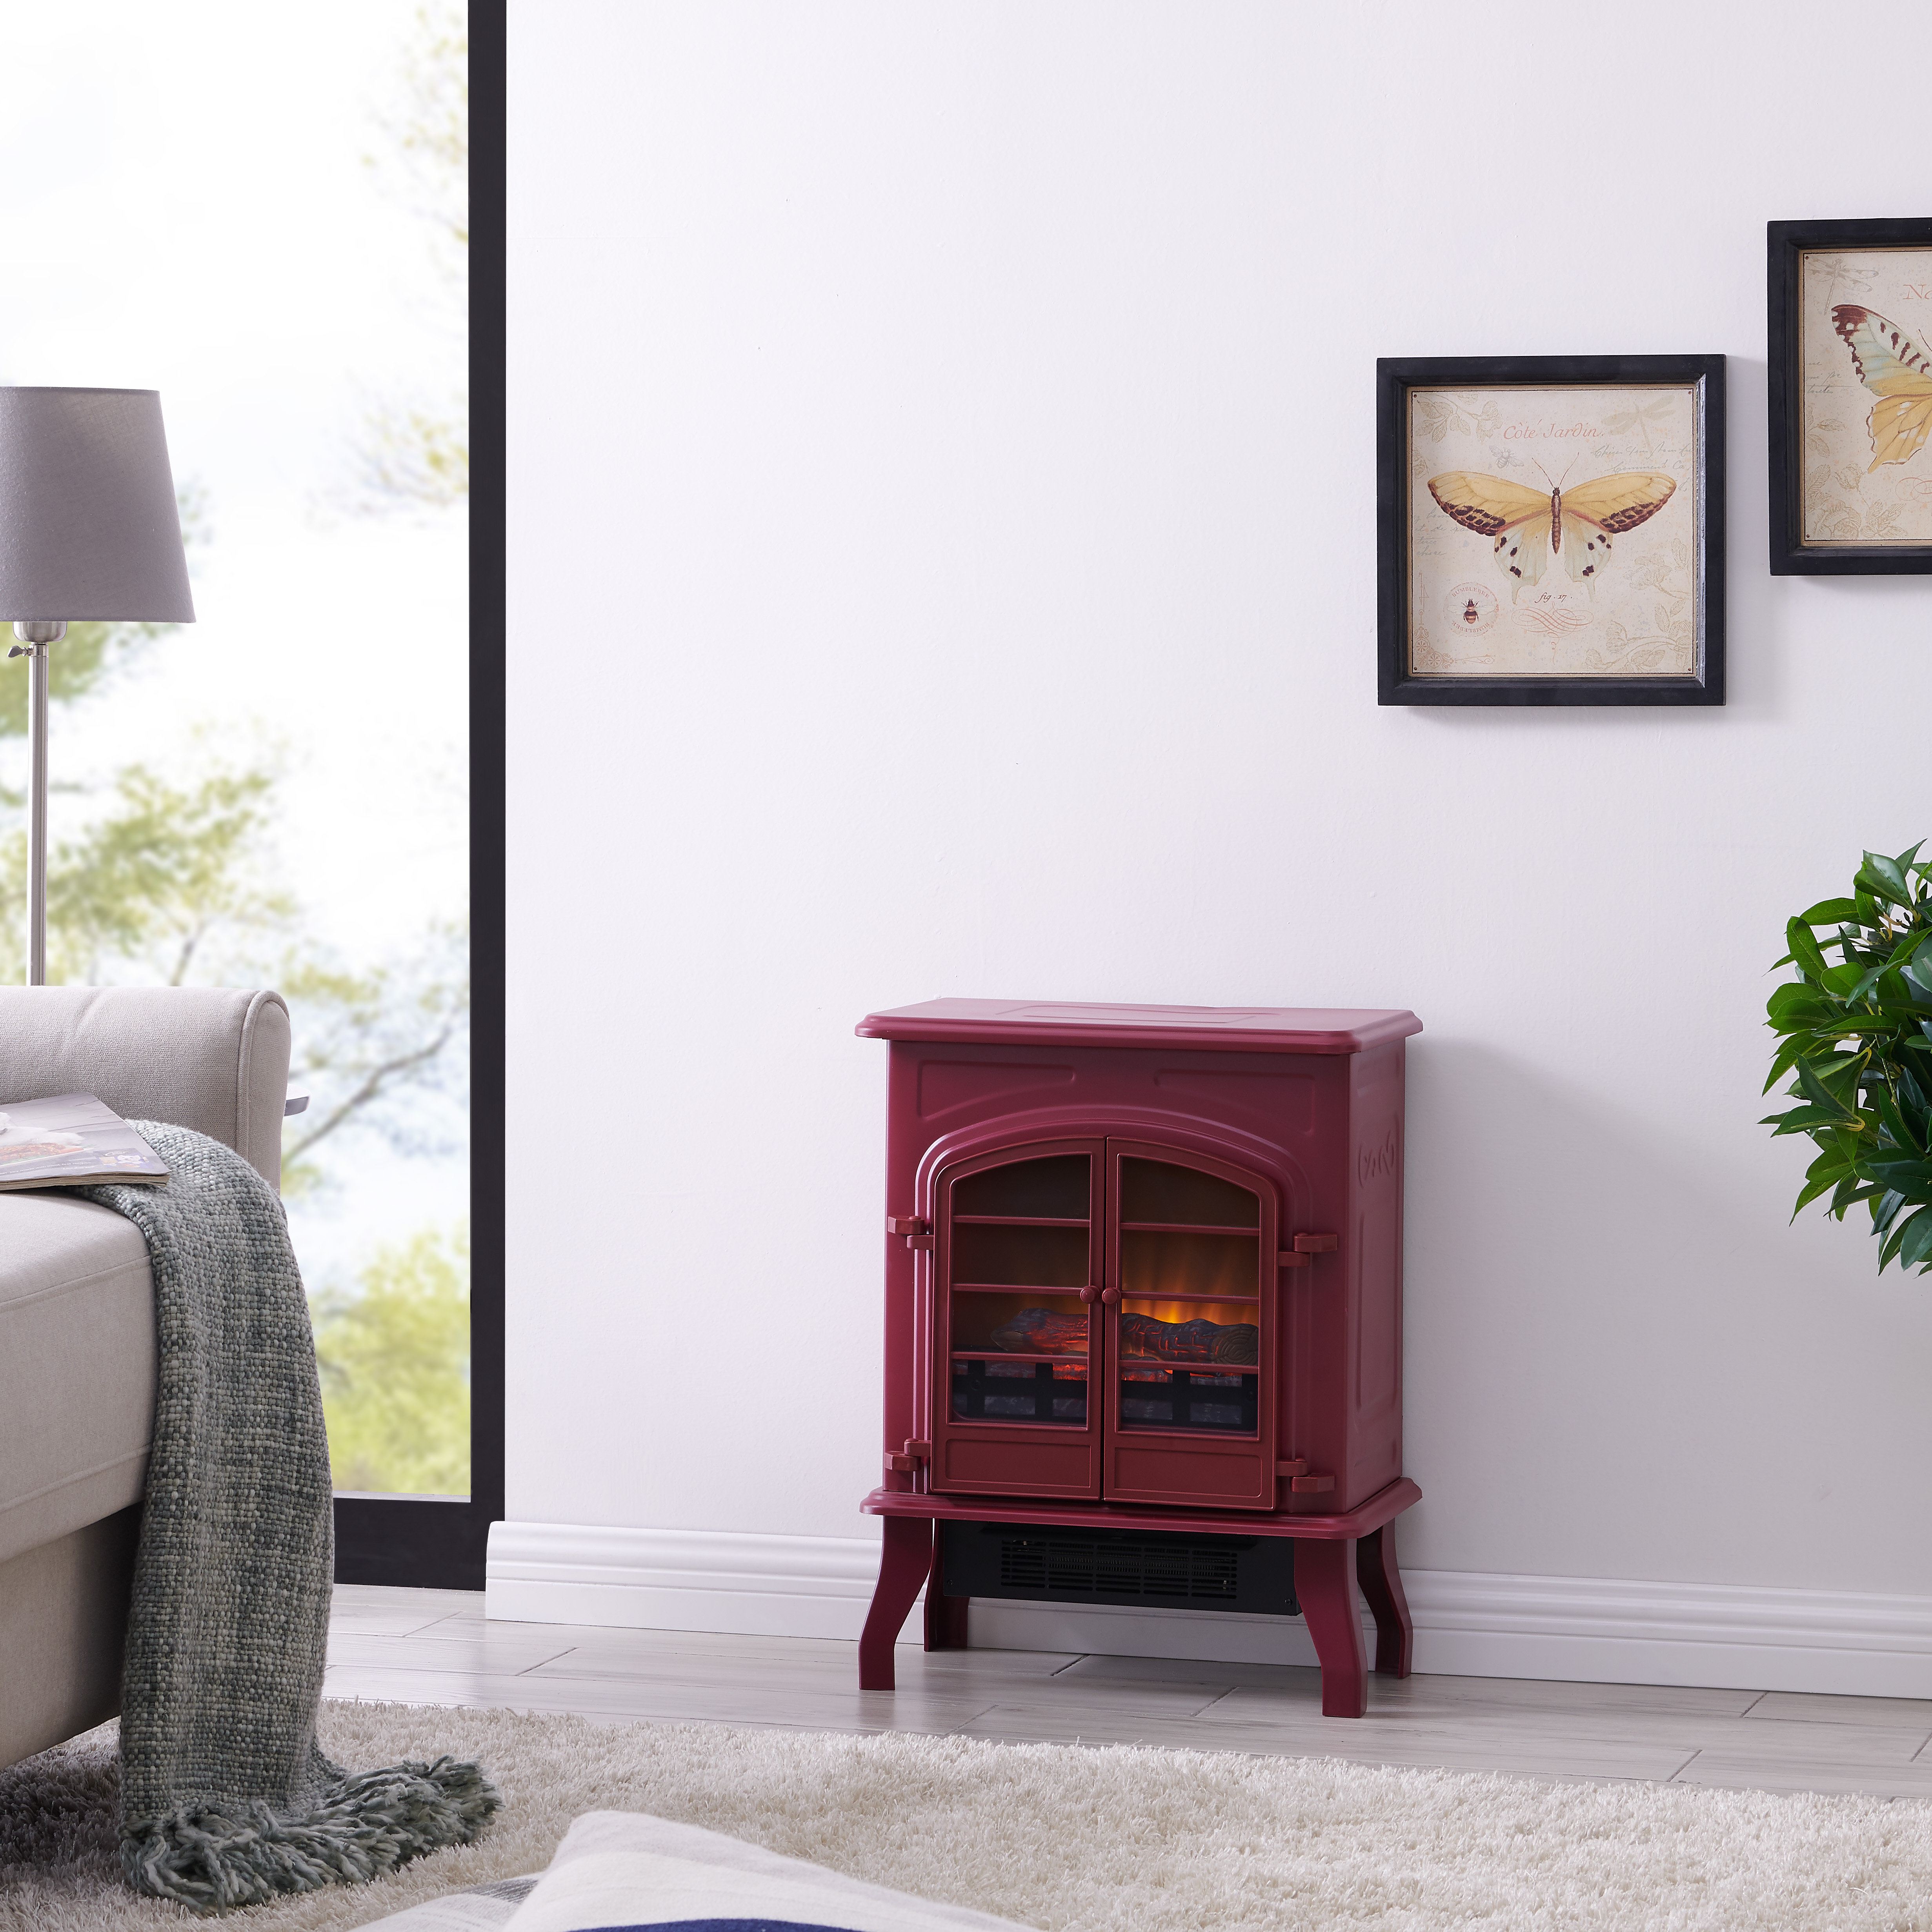 Bold Flame Electric Space Heater, Glossy Red - image 5 of 7